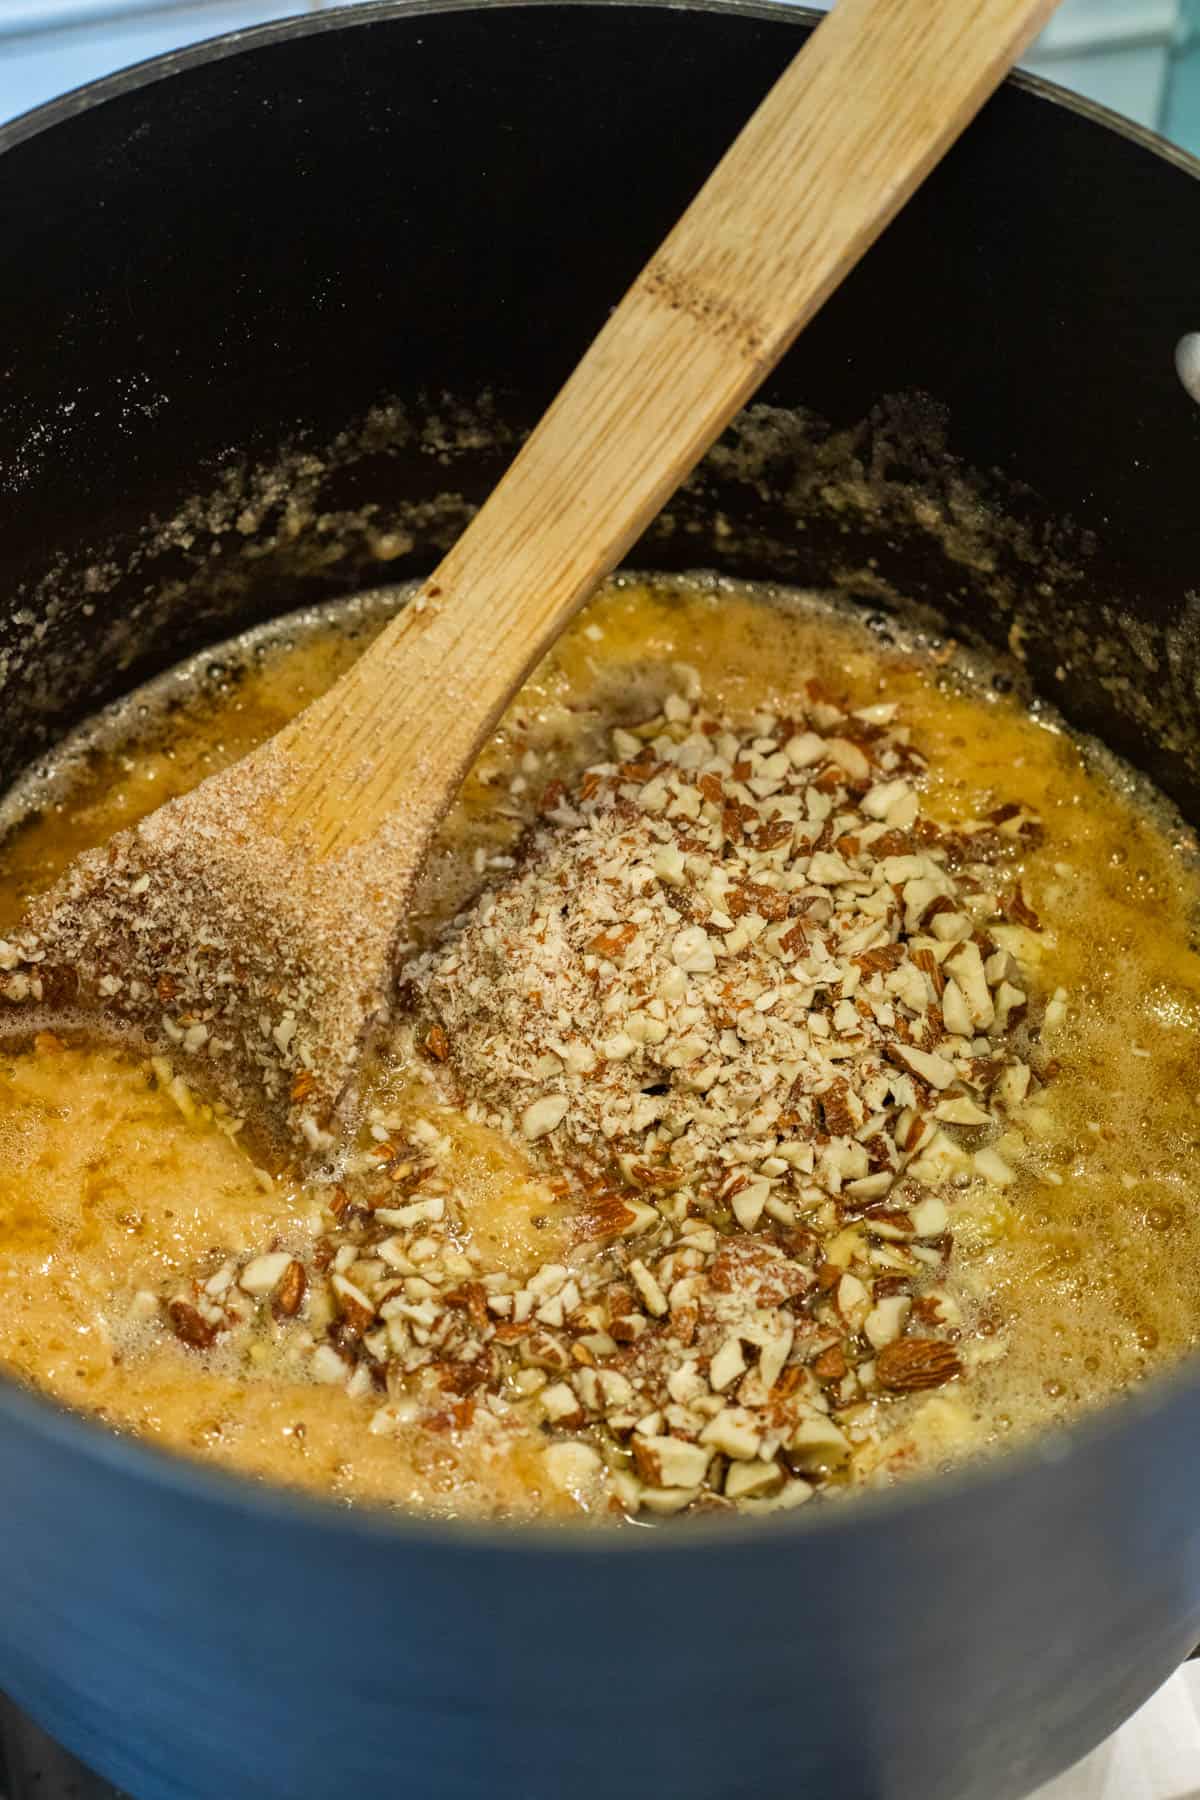 Almonds added to melted butter and sugar mixture.